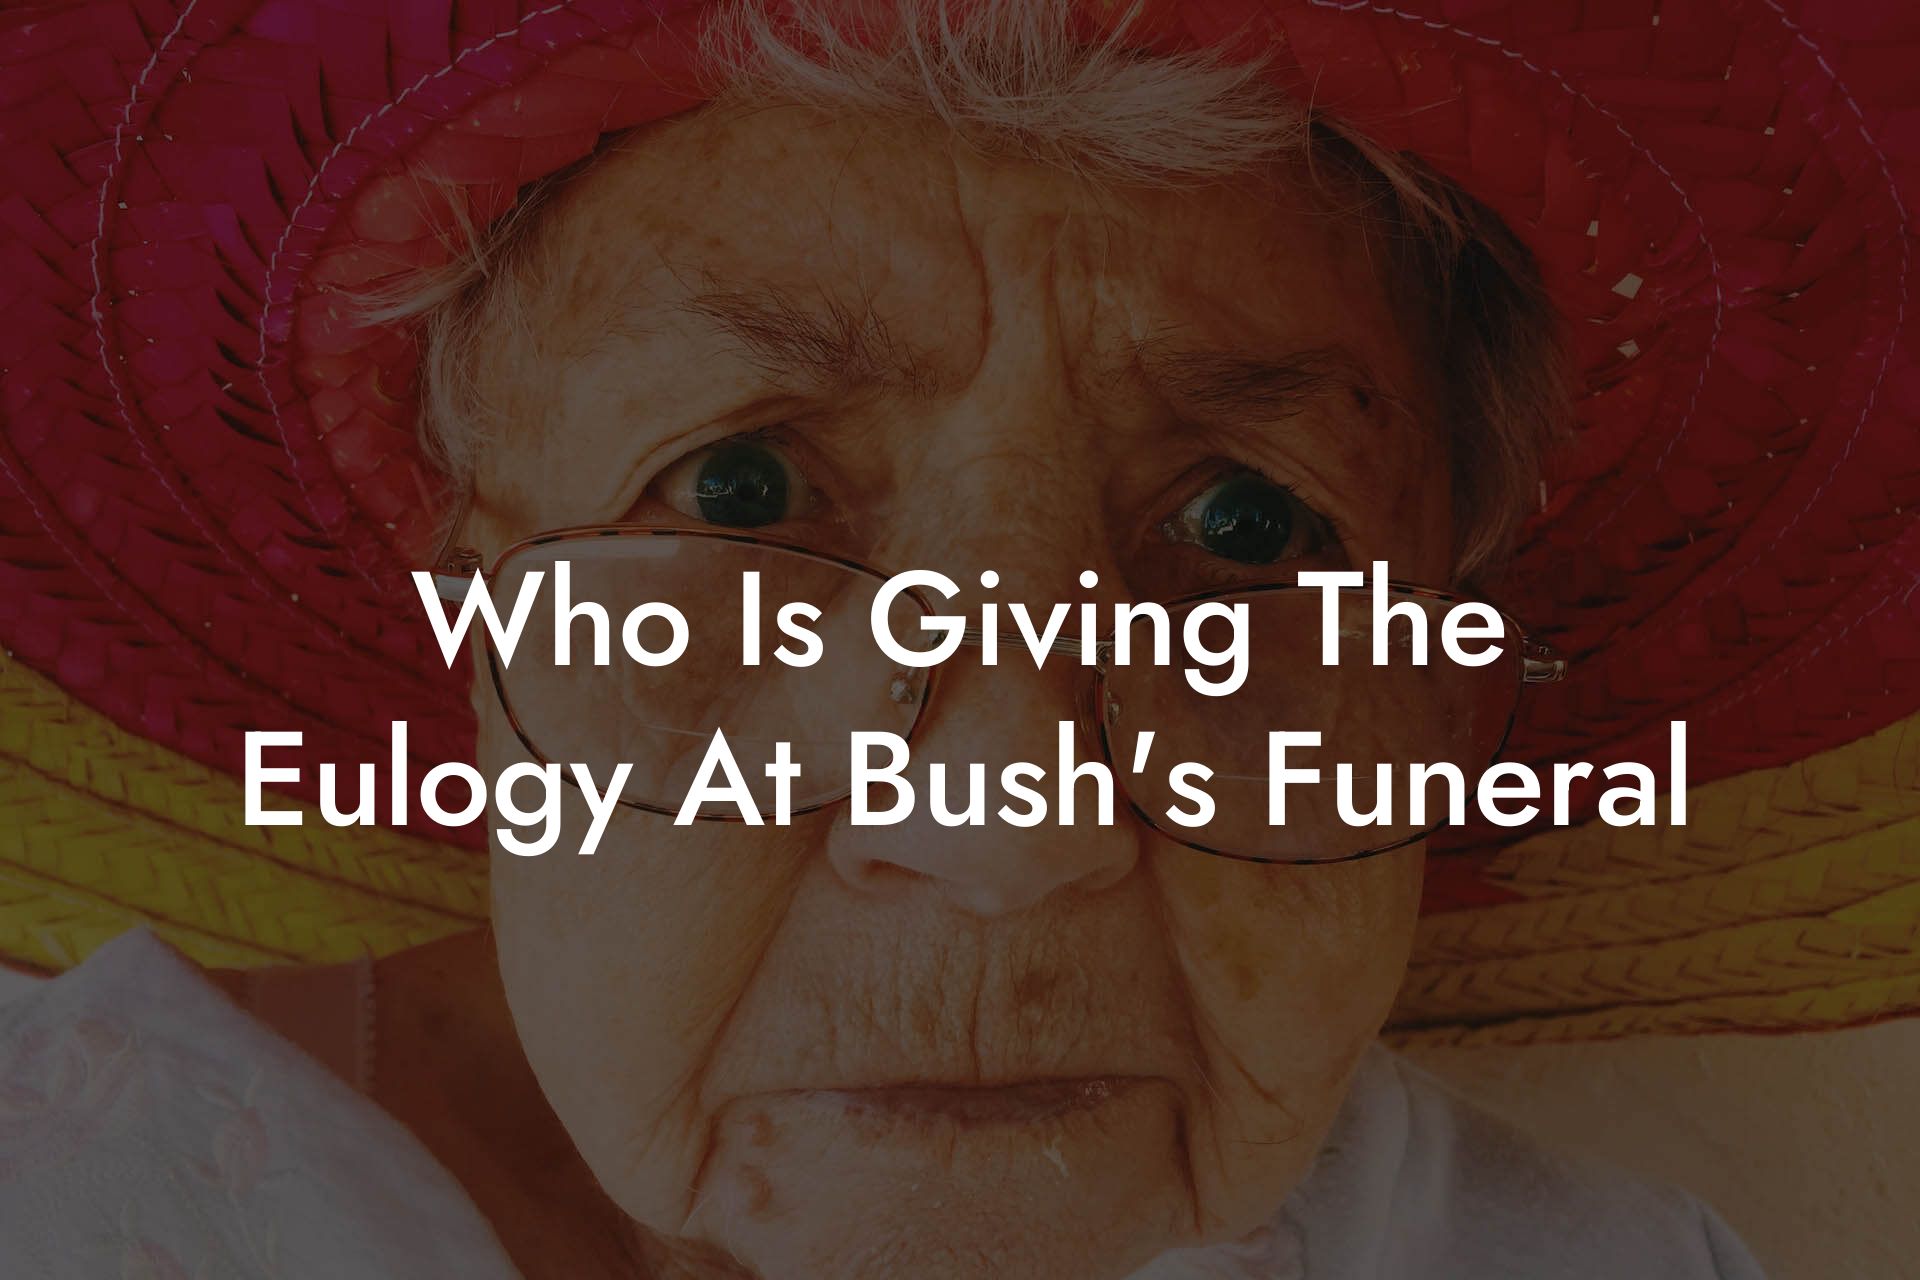 Who Is Giving The Eulogy At Bush's Funeral